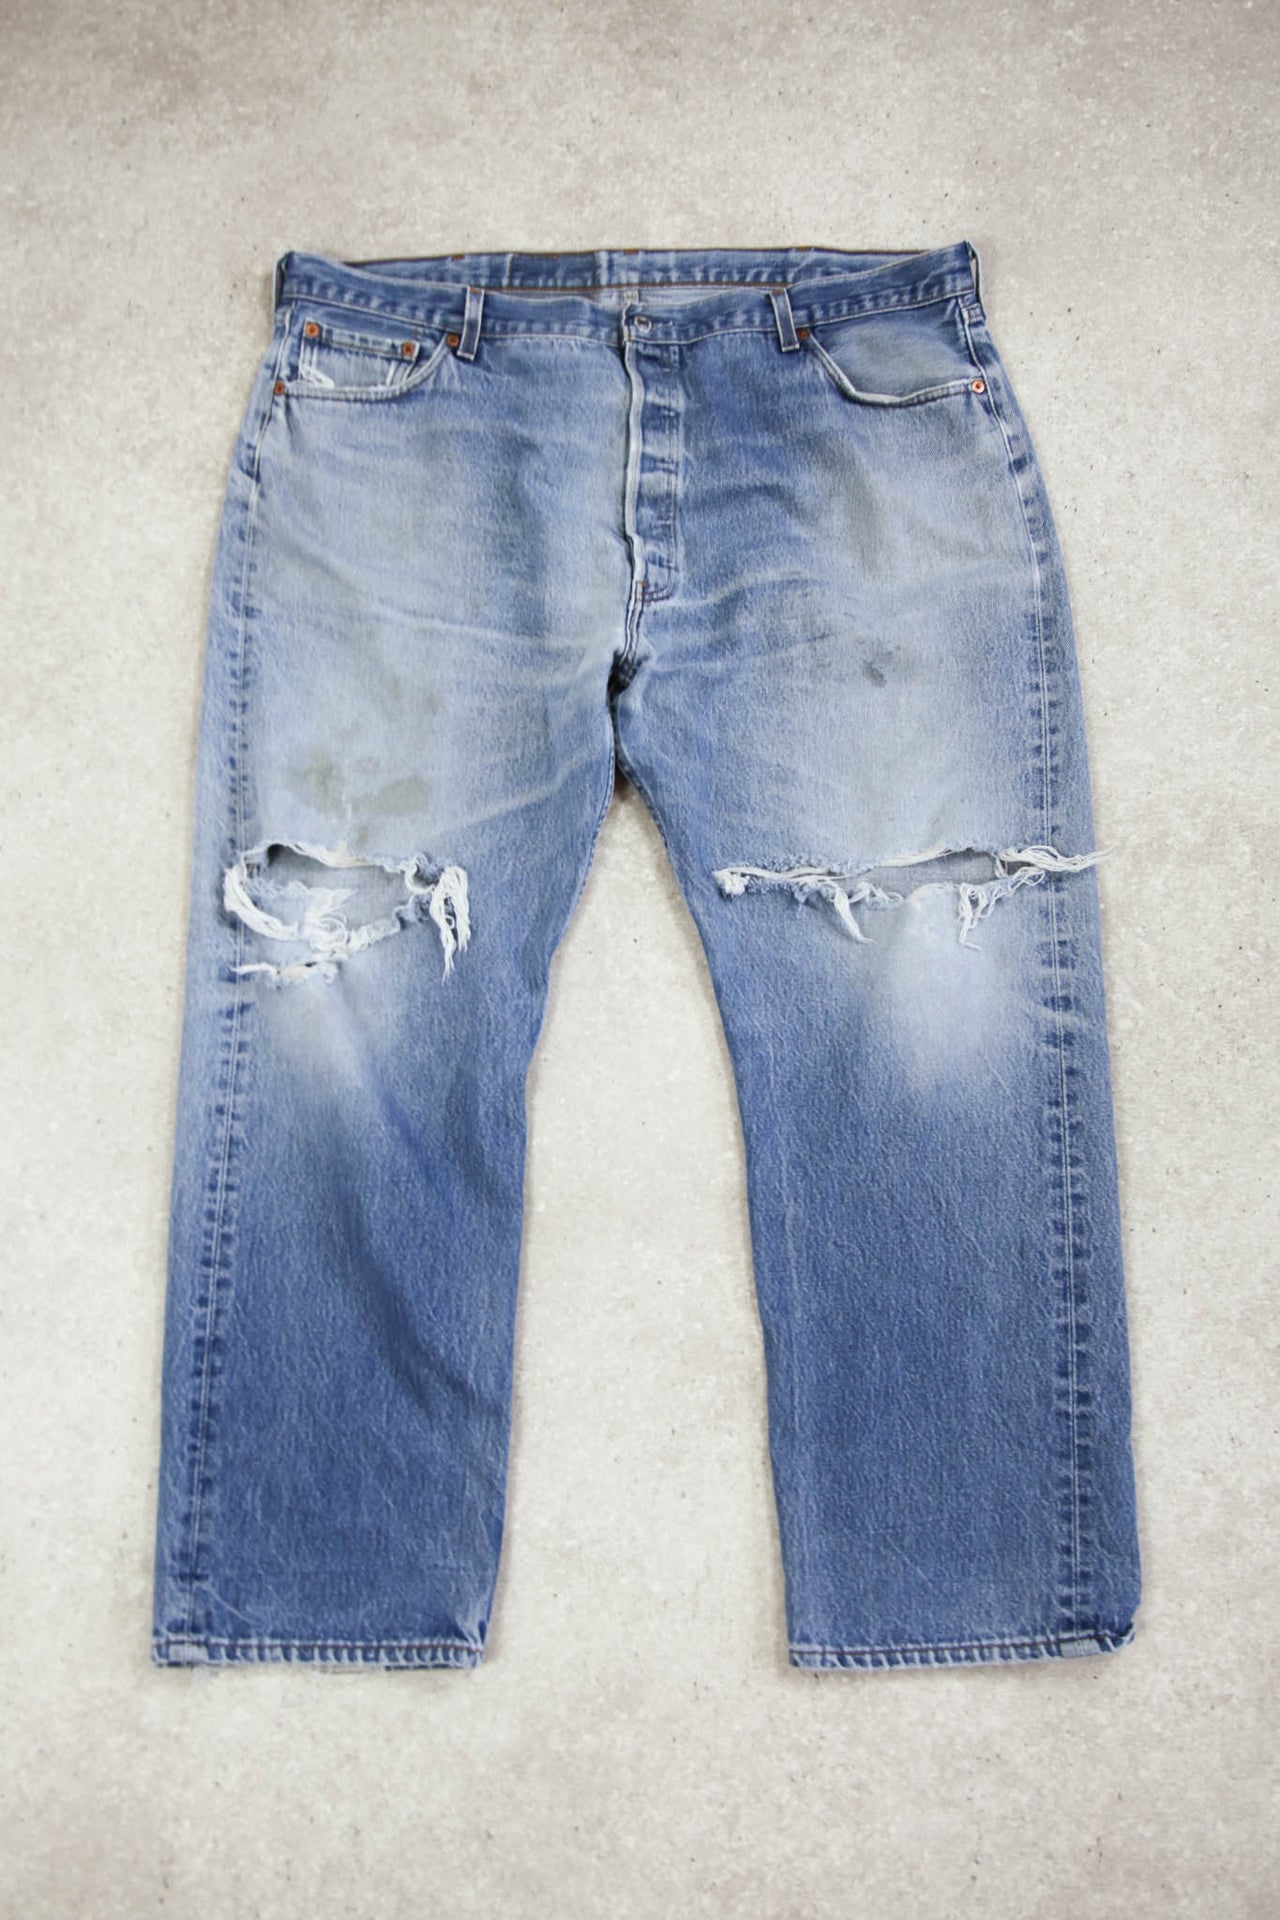 Made in USA Levi's 501 Thigh Rip Mid Wash Jeans (W44 L29)